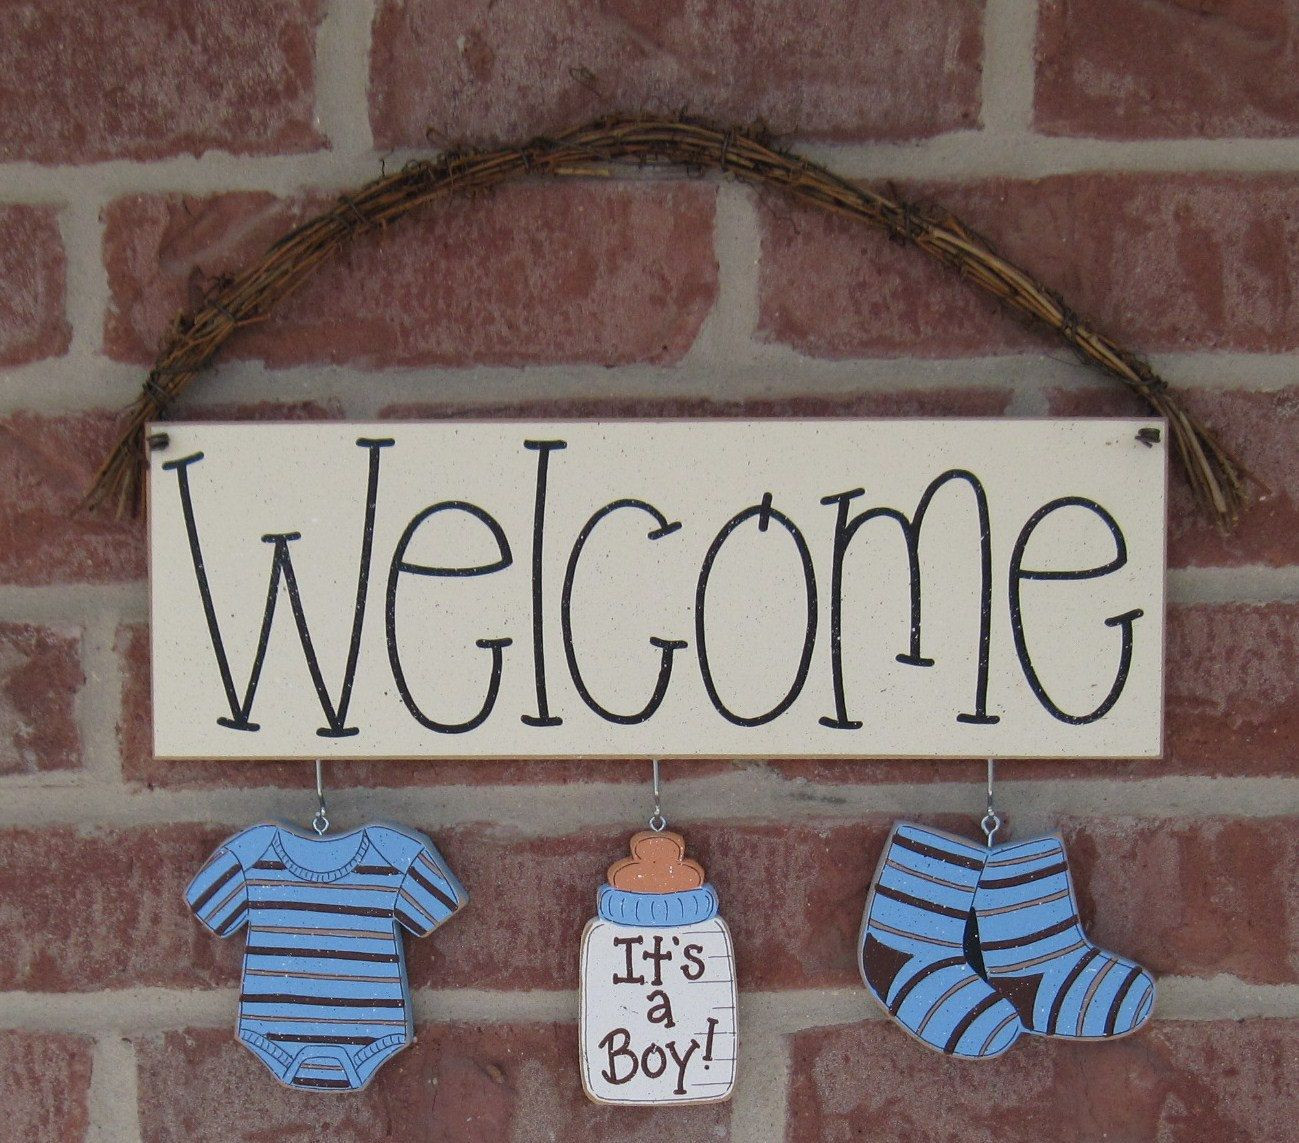 Baby Welcome Decoration Ideas
 WEL E ITS A BOY Decorations no sign included for